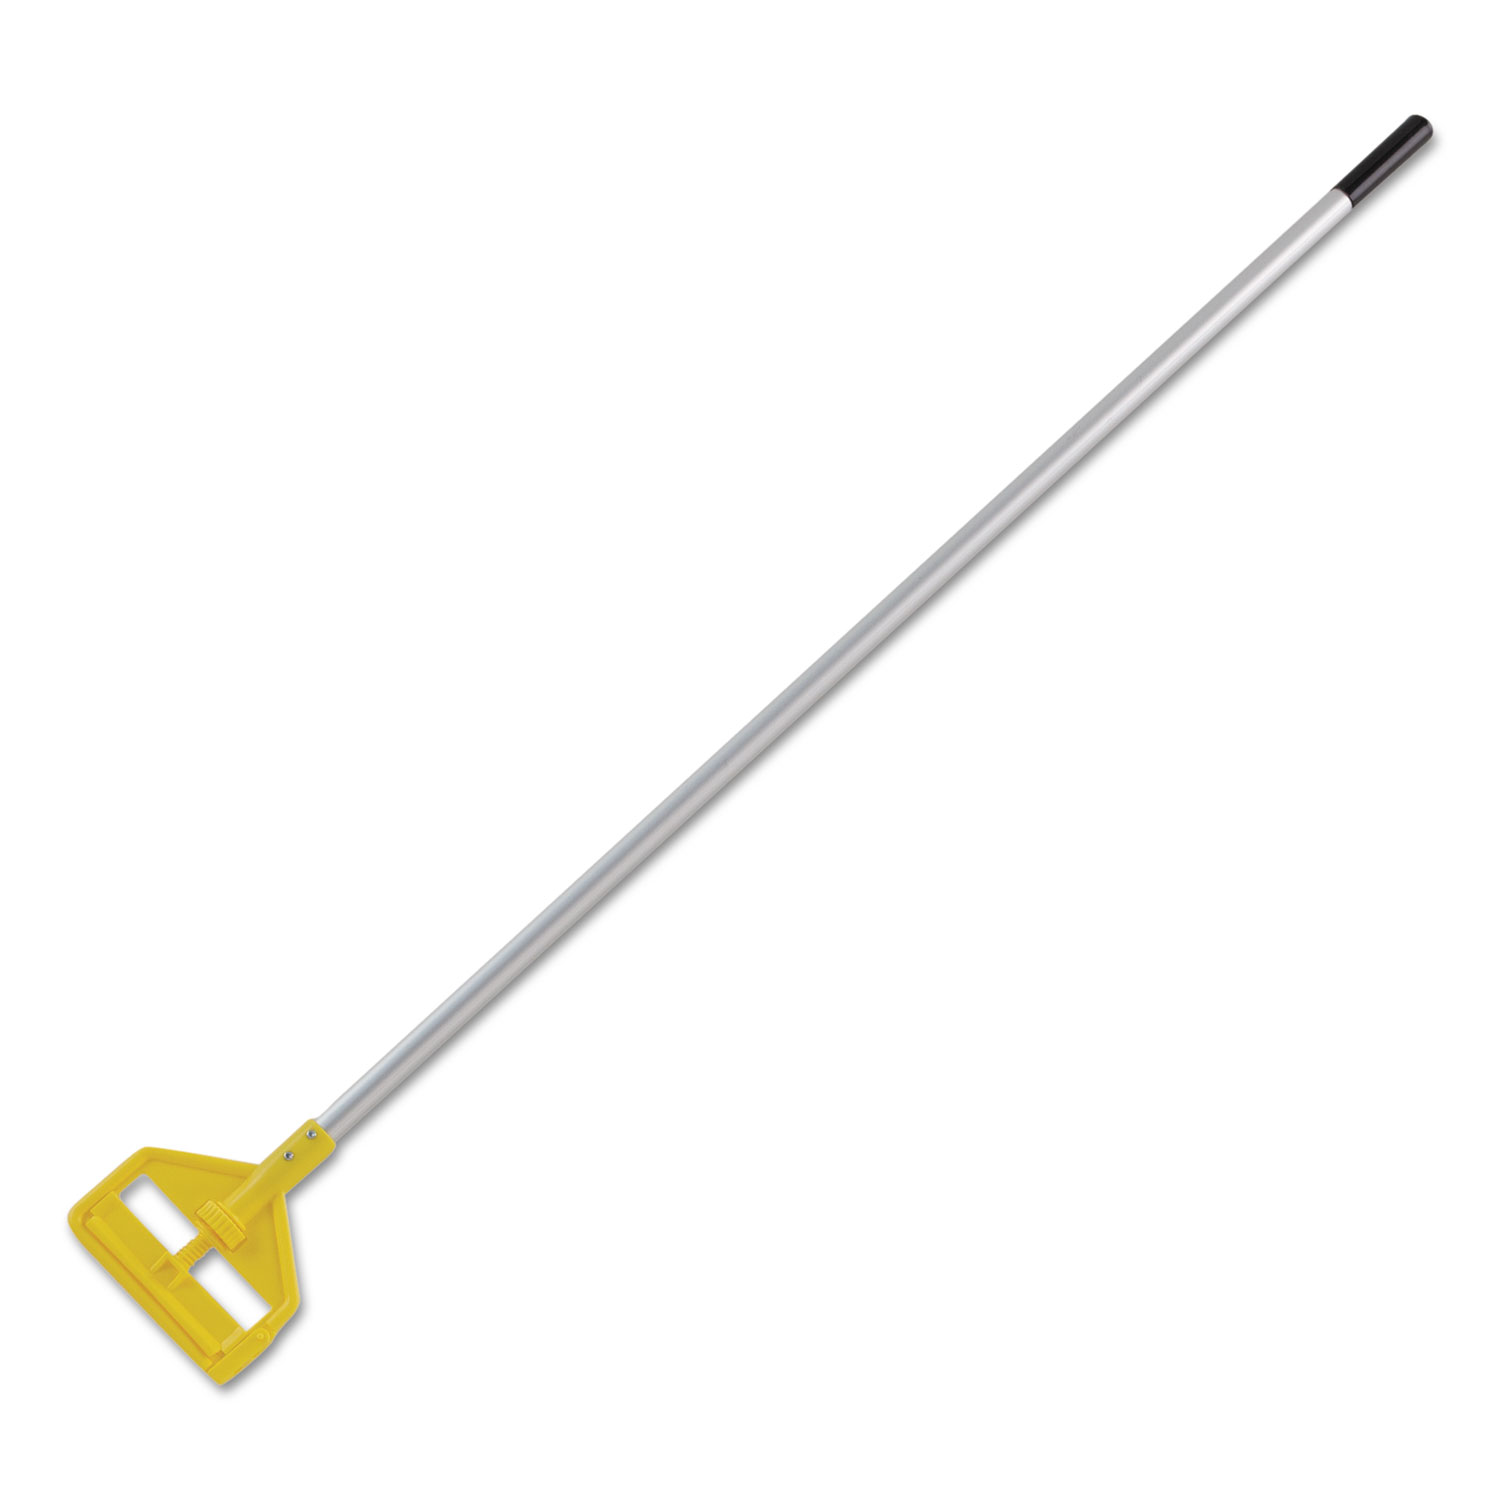  Rubbermaid Commercial FGH126000000 Invader Aluminum Side-Gate Wet-Mop Handle, 60, Gray/Yellow (RCPH126) 